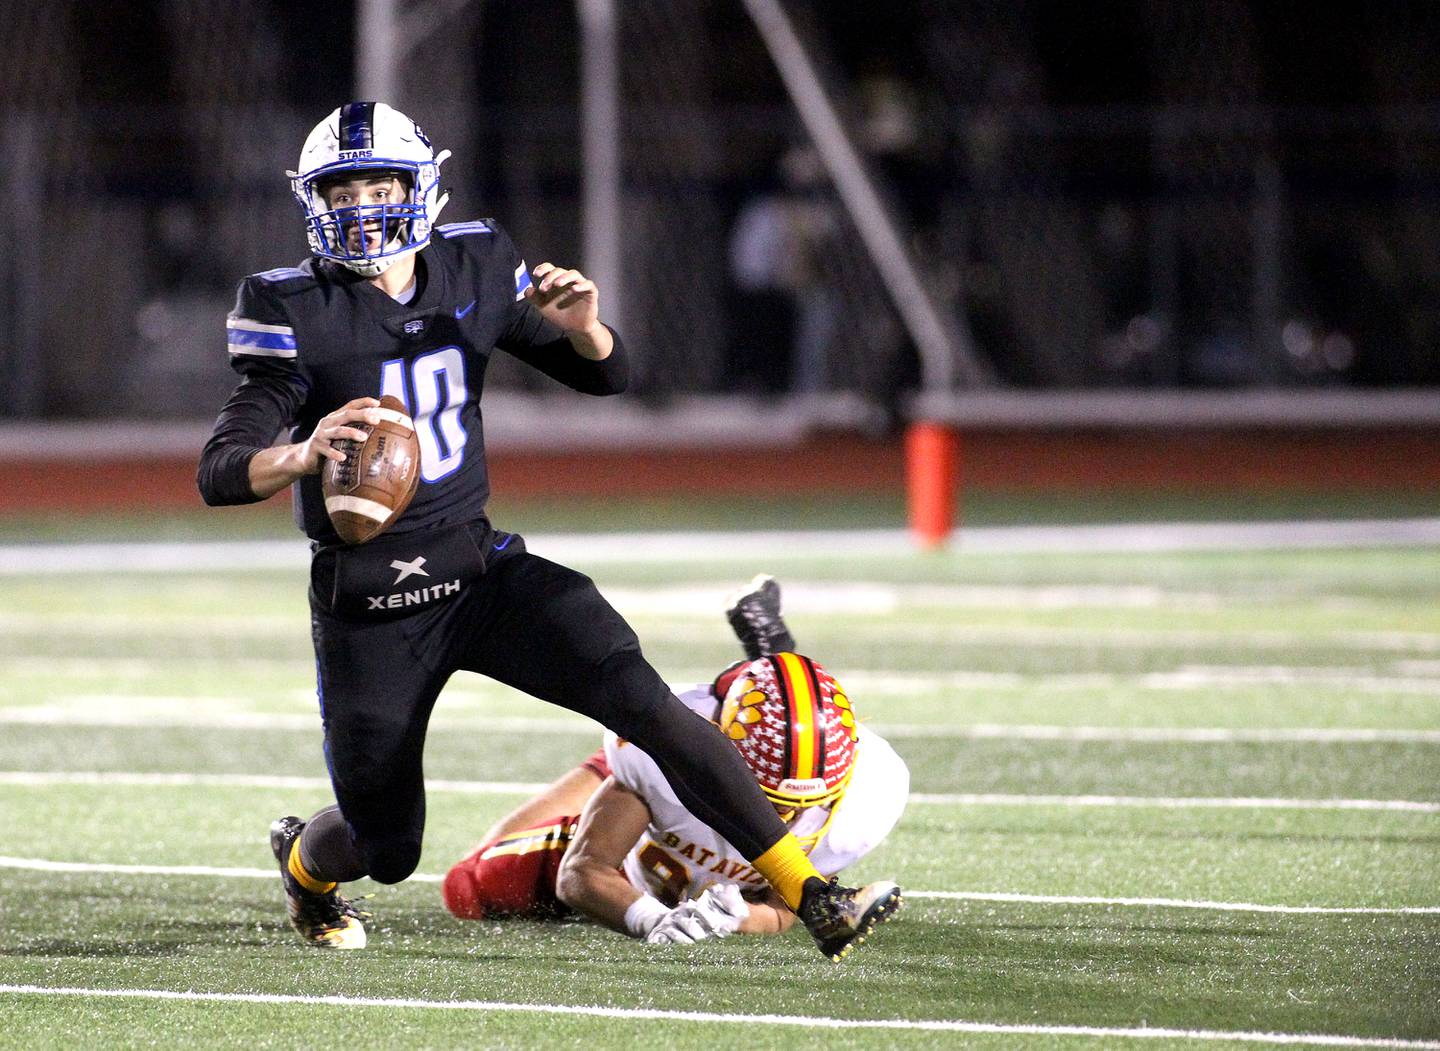 St. Charles North quarterback Ethan Plumb looks to pass the ball during a game against Batavia at St. Charles North on Friday, Oct. 22, 2021.